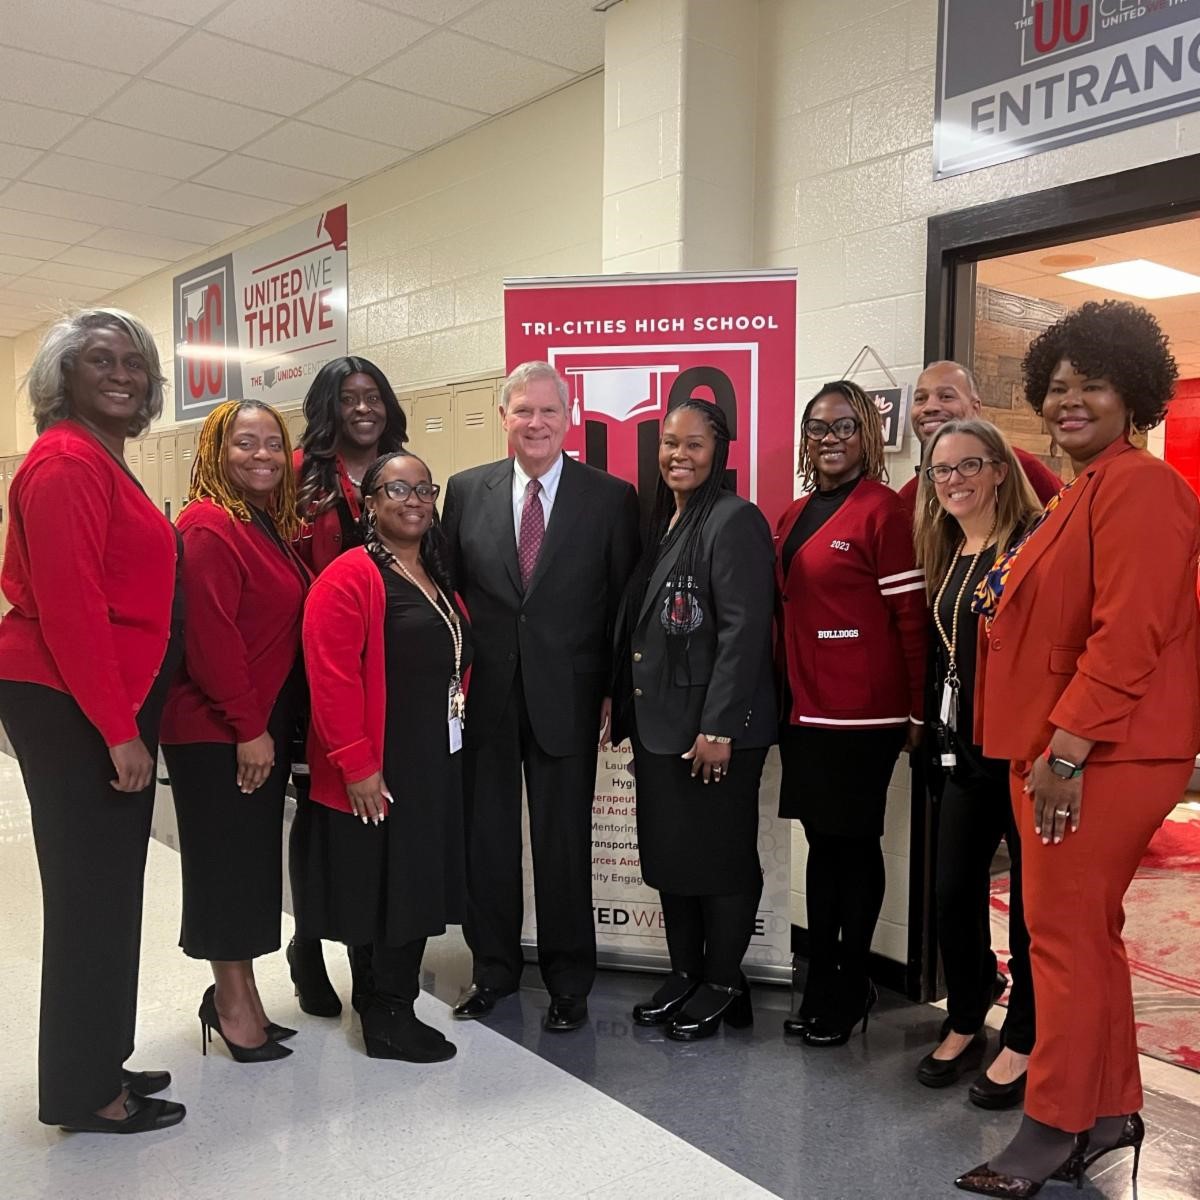 Agriculture Secretary Tom Vilsack and Dr. Cotwright pose with officials from Tri-Cities High School in East Point, Georgia after a roundtable discussion with school, local, and state officials, students, nutrition experts, community organizations, and rural producers